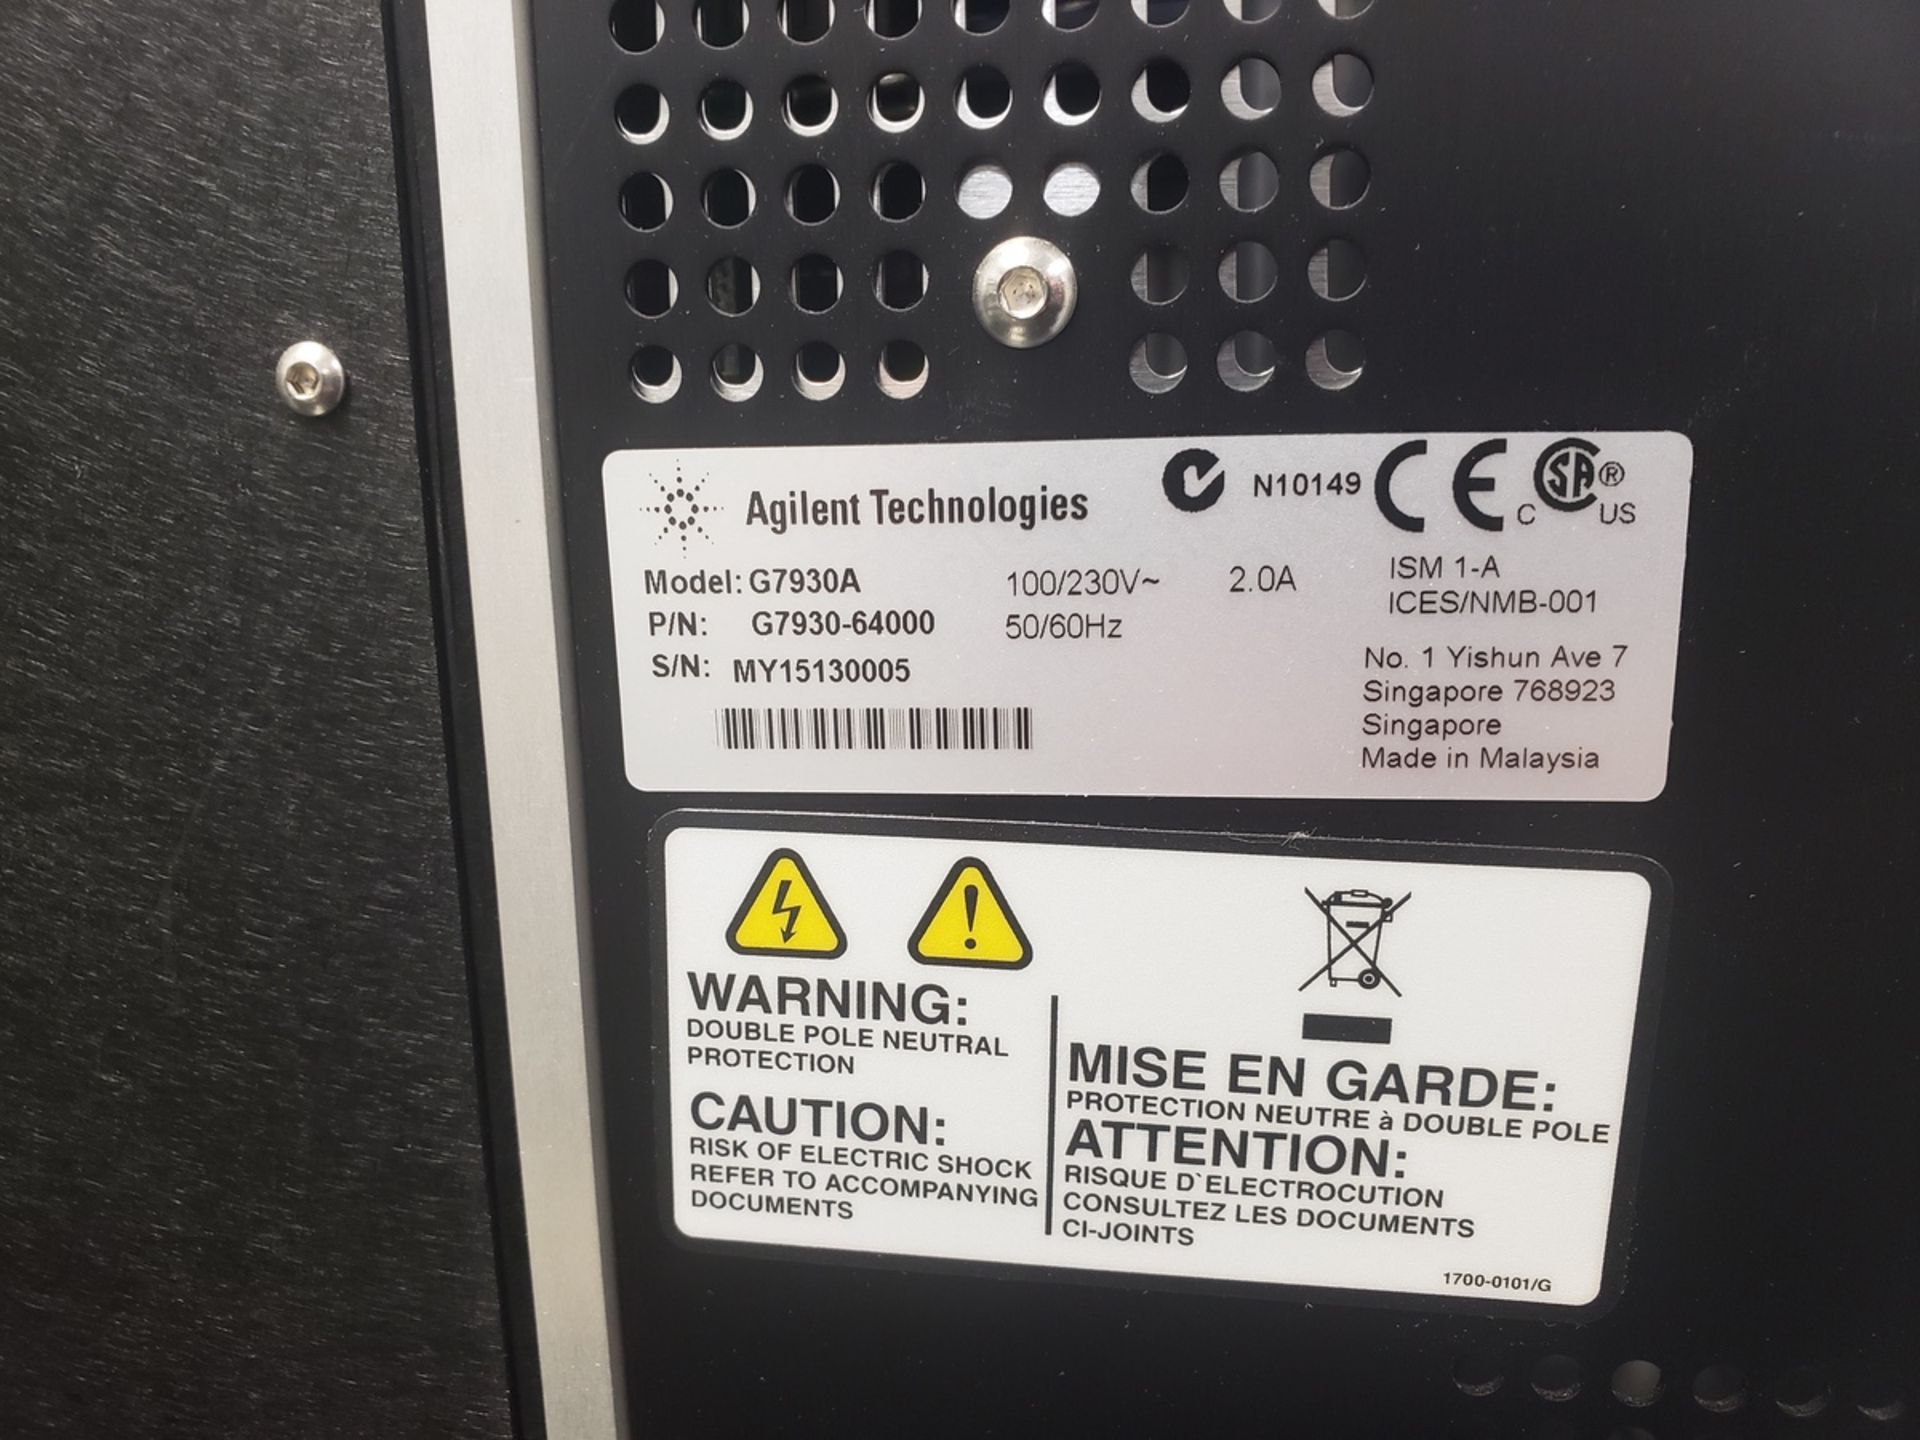 Agilent Technologies 850-DS Dissolution Sampling Station, M# G7930A, S/N MY15130005 - Image 2 of 3